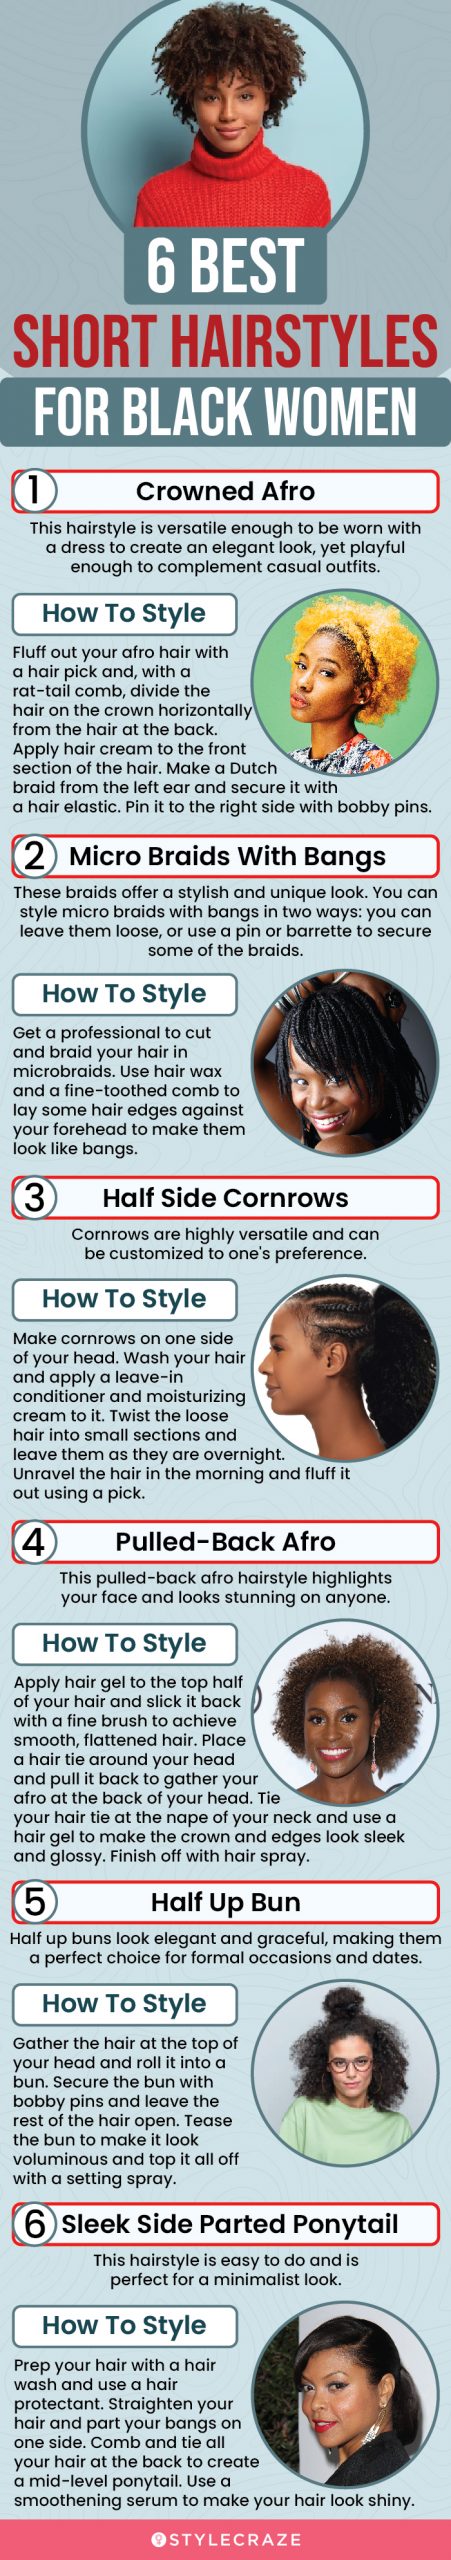 14 EASY HAIRSTYLES FOR SHORT NATURAL HAIR ON BLACK WOMEN